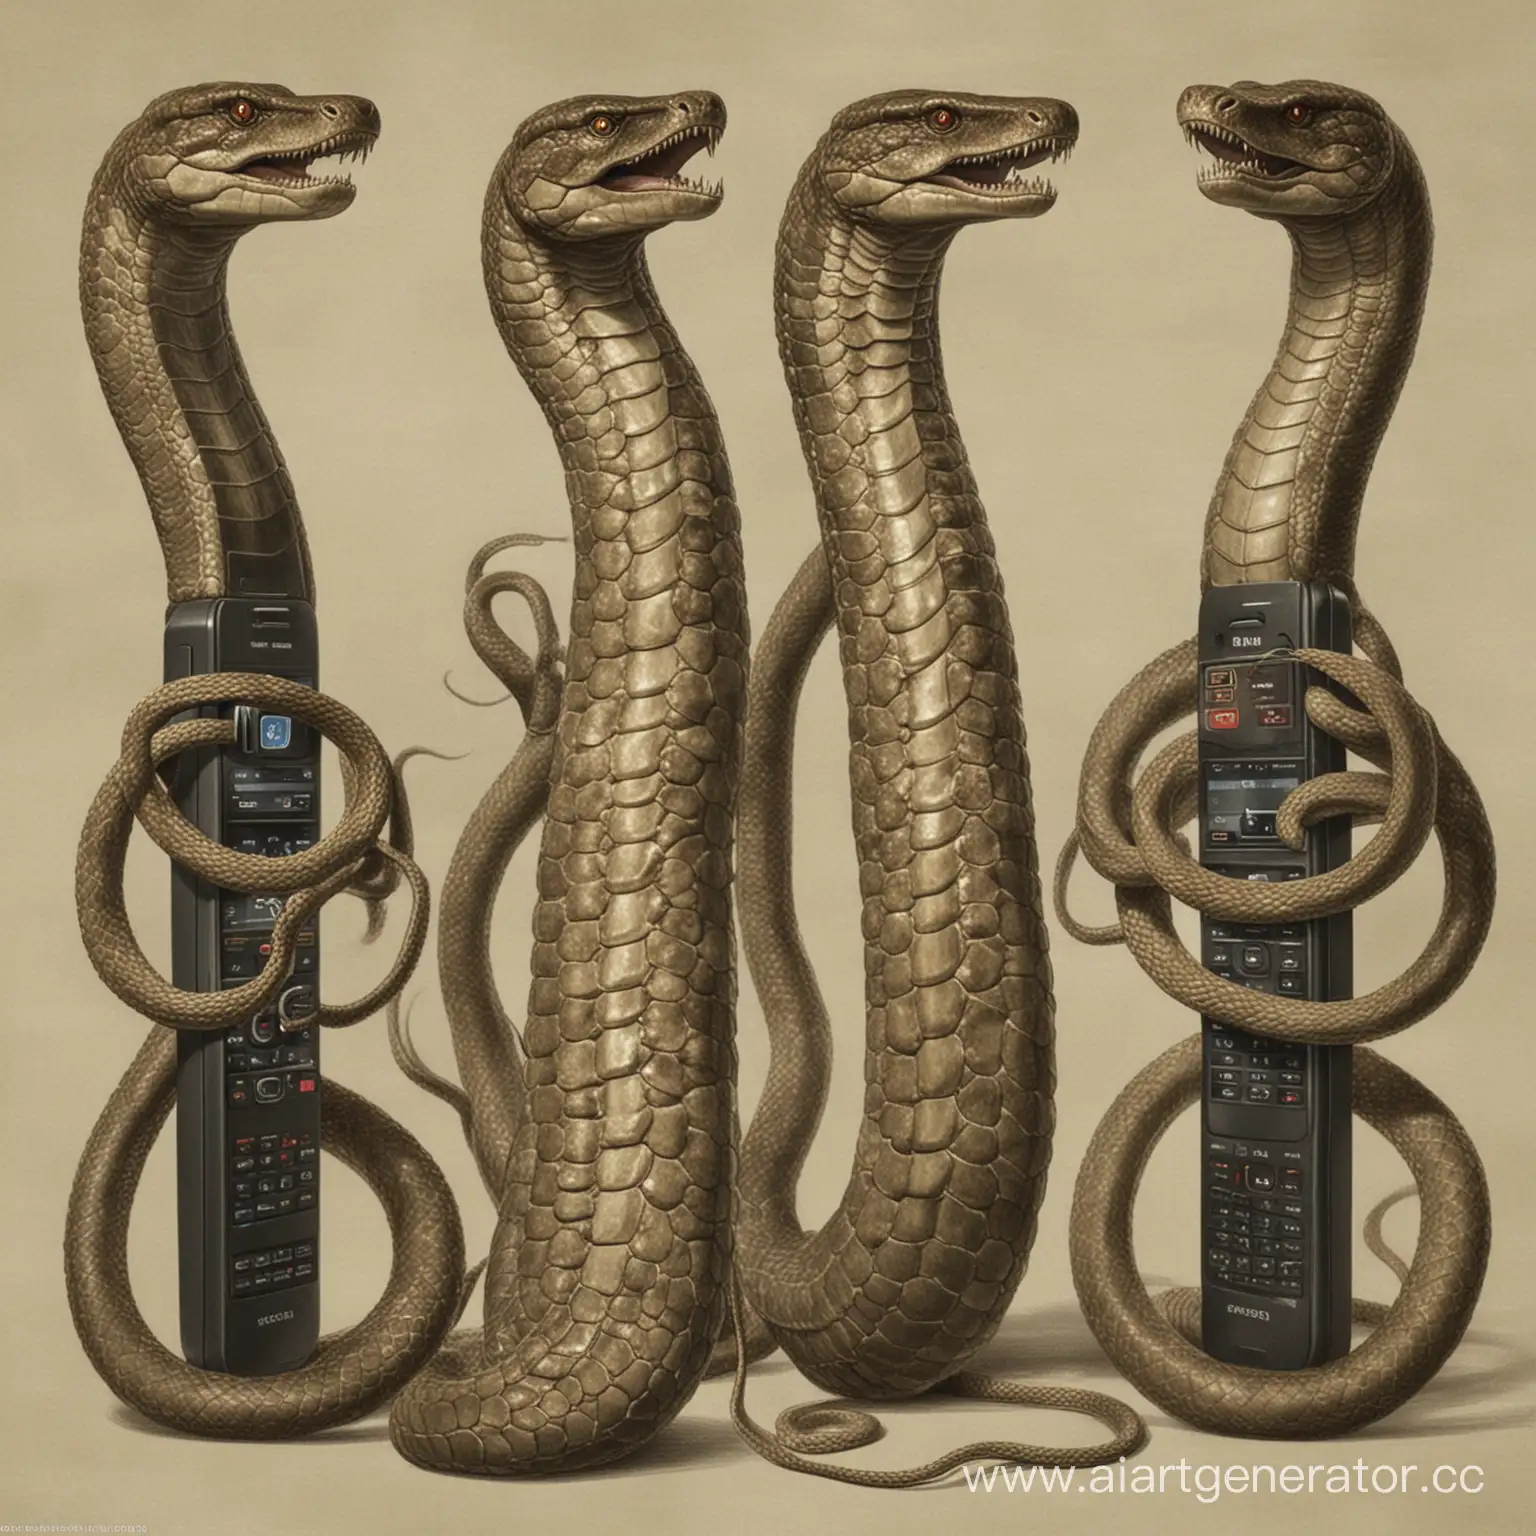 Hydra, with three heads, like a gorynych snake, in both hands the phones they use to call Russia
